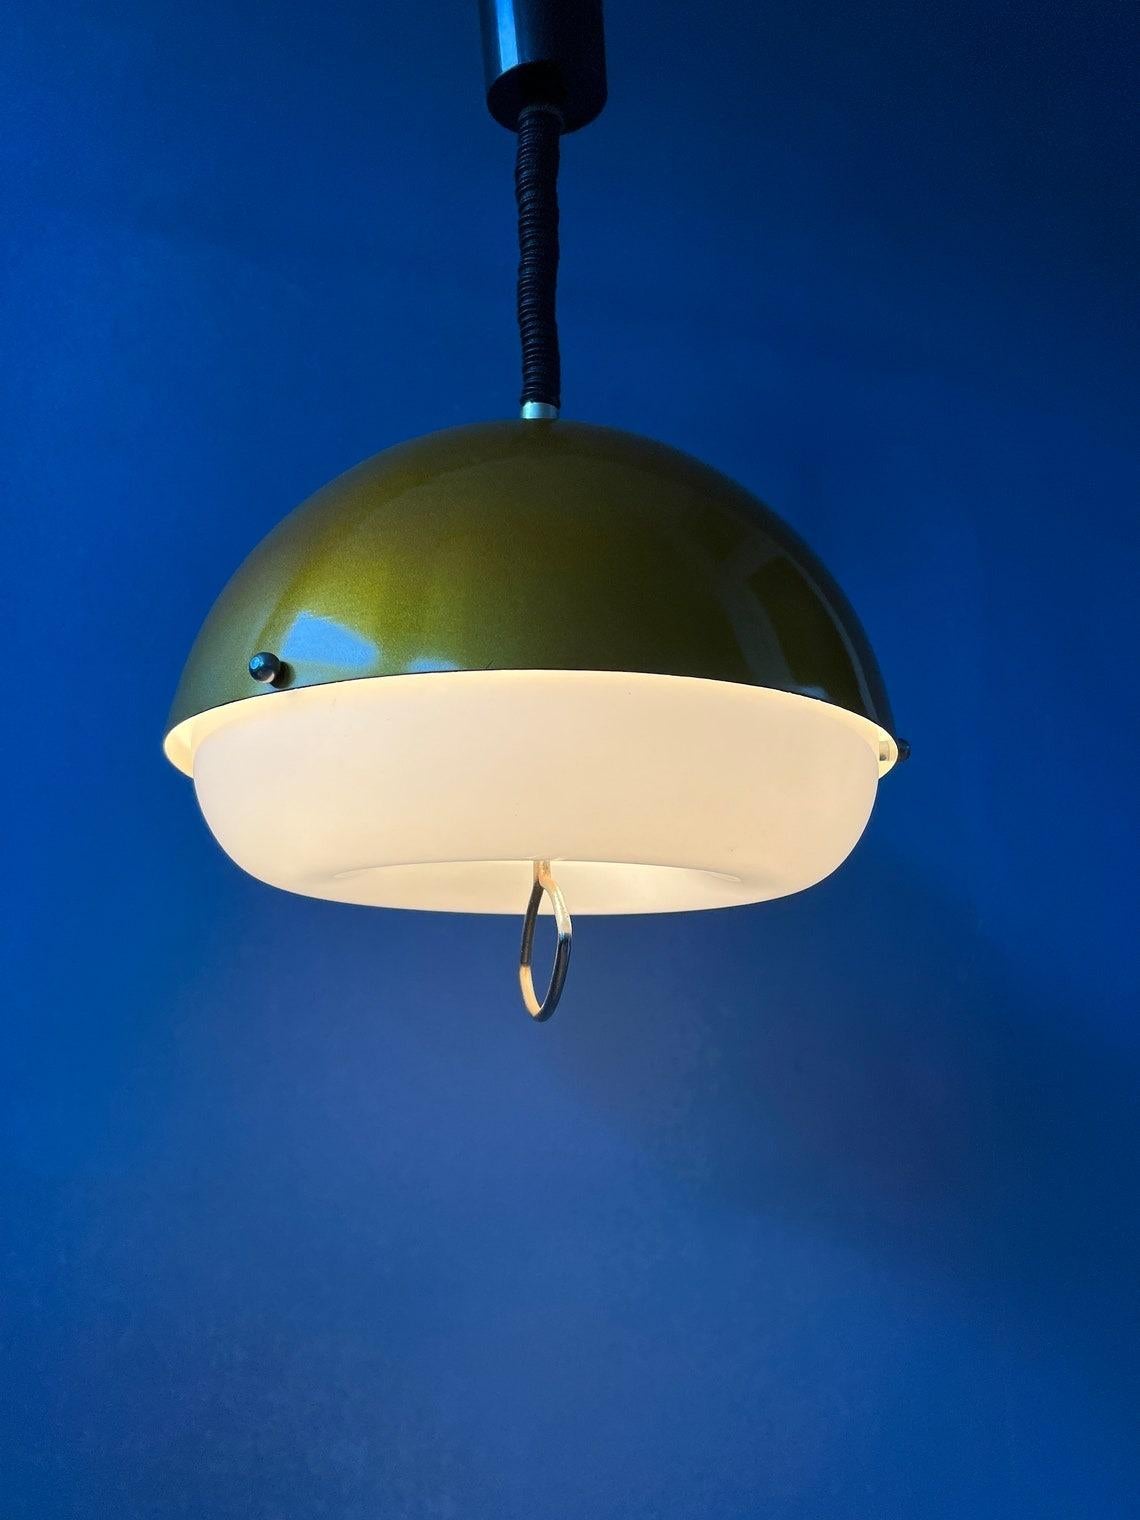 Very rare space age pendant lamp with metallic, golden upper shade and acrylic lower shade. Experience the golden glow cast by the pendant light as it bathes your space in a soft, luminous ambiance. The light dances off the metallic surface,